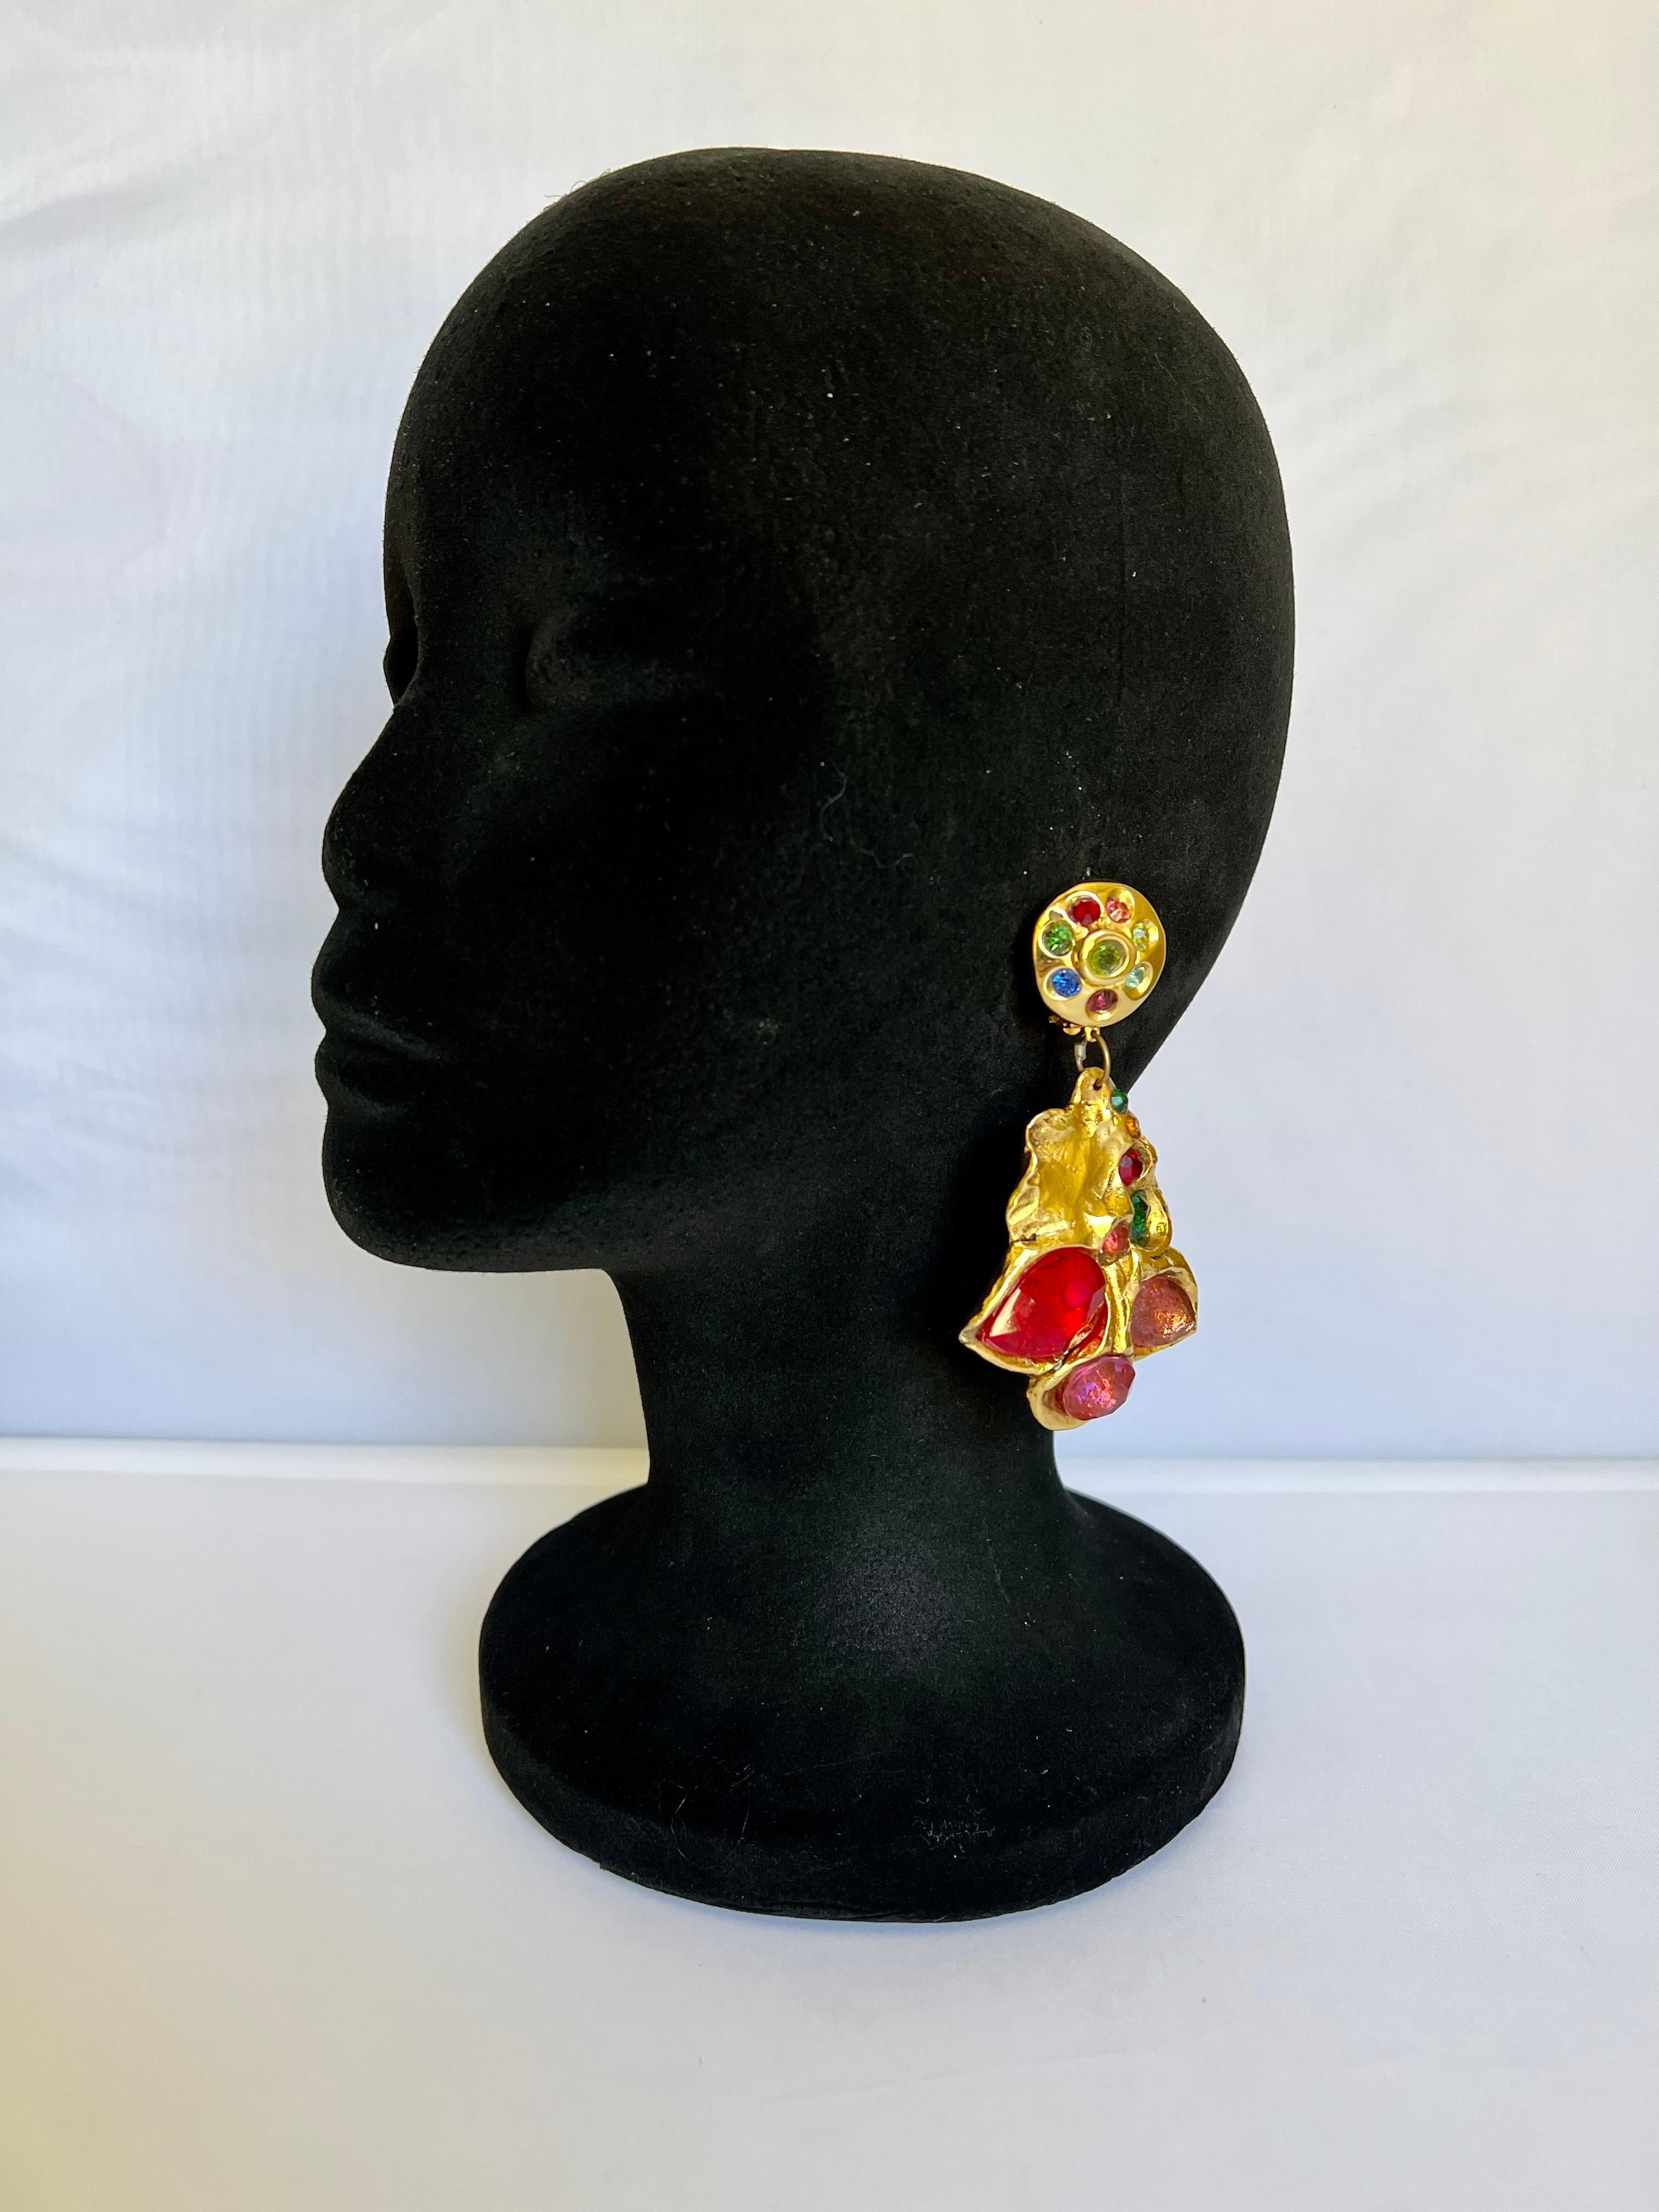 Phenomenal XL vintage clip-on statement earrings by Kalinger Paris. Comprised of 